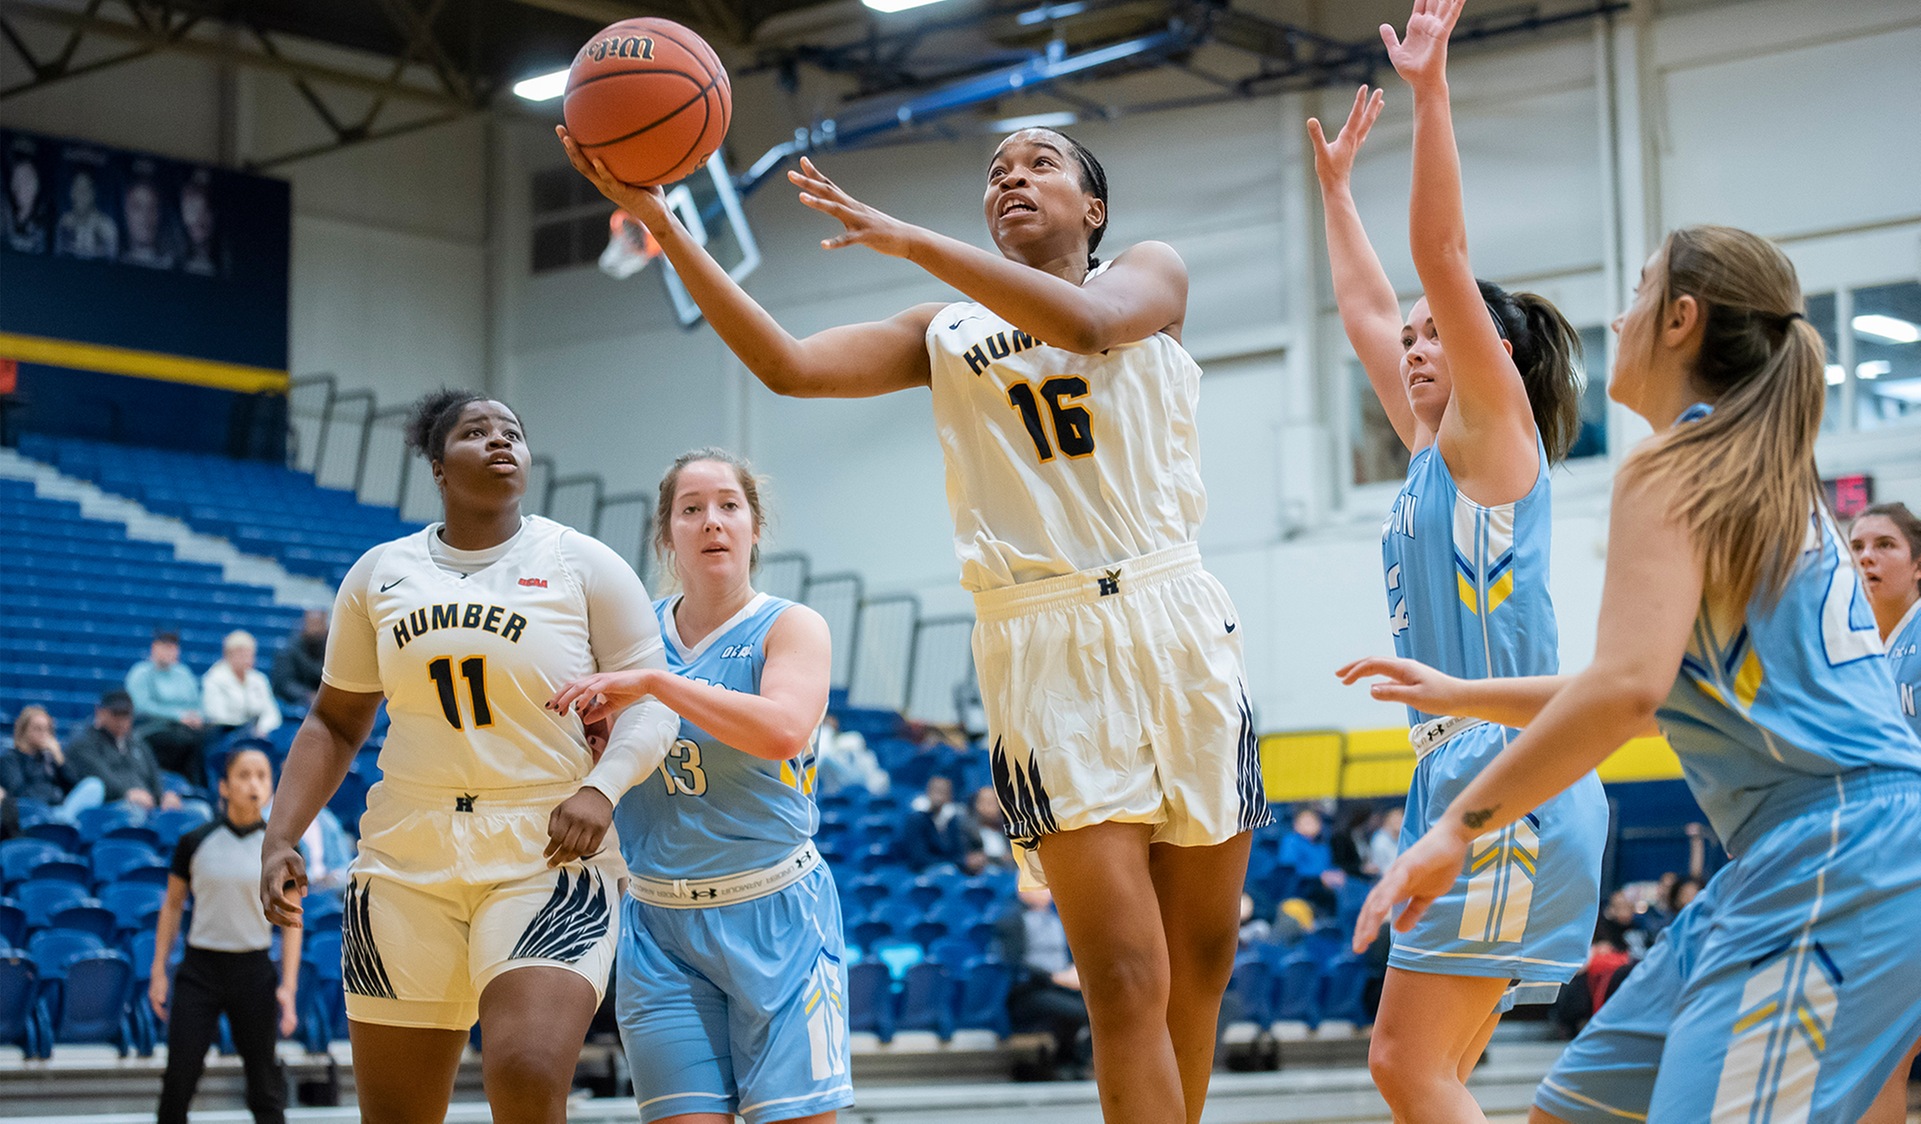 No. 12 WOMEN'S BASKETBALL CONCLUDES ROAD TRIP WITH WIN AT LAMBTON, 87-50